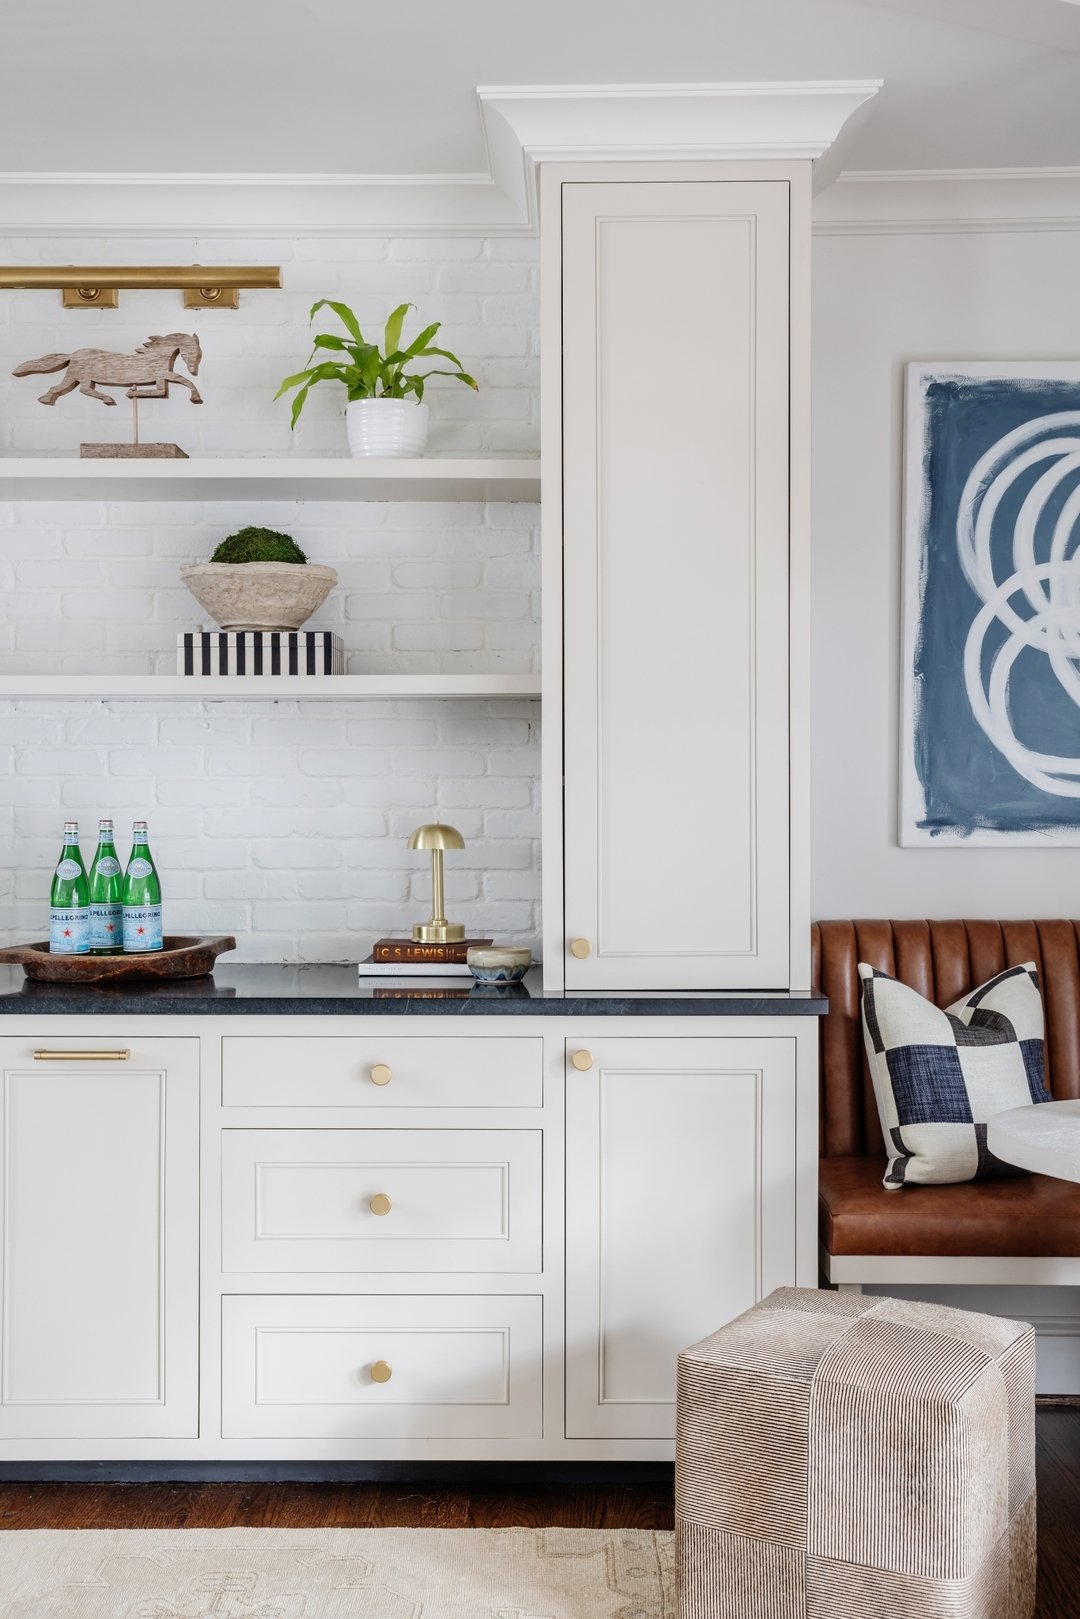 Inside scoop: These shelves were designed to be high enough that a pizza box can fully open on the counter below! 🍕 This media room is ready for hosting.

#perchinteriors #houseinspiration #interiordesign #interiors #cltdesign #charlotteinteriordesi